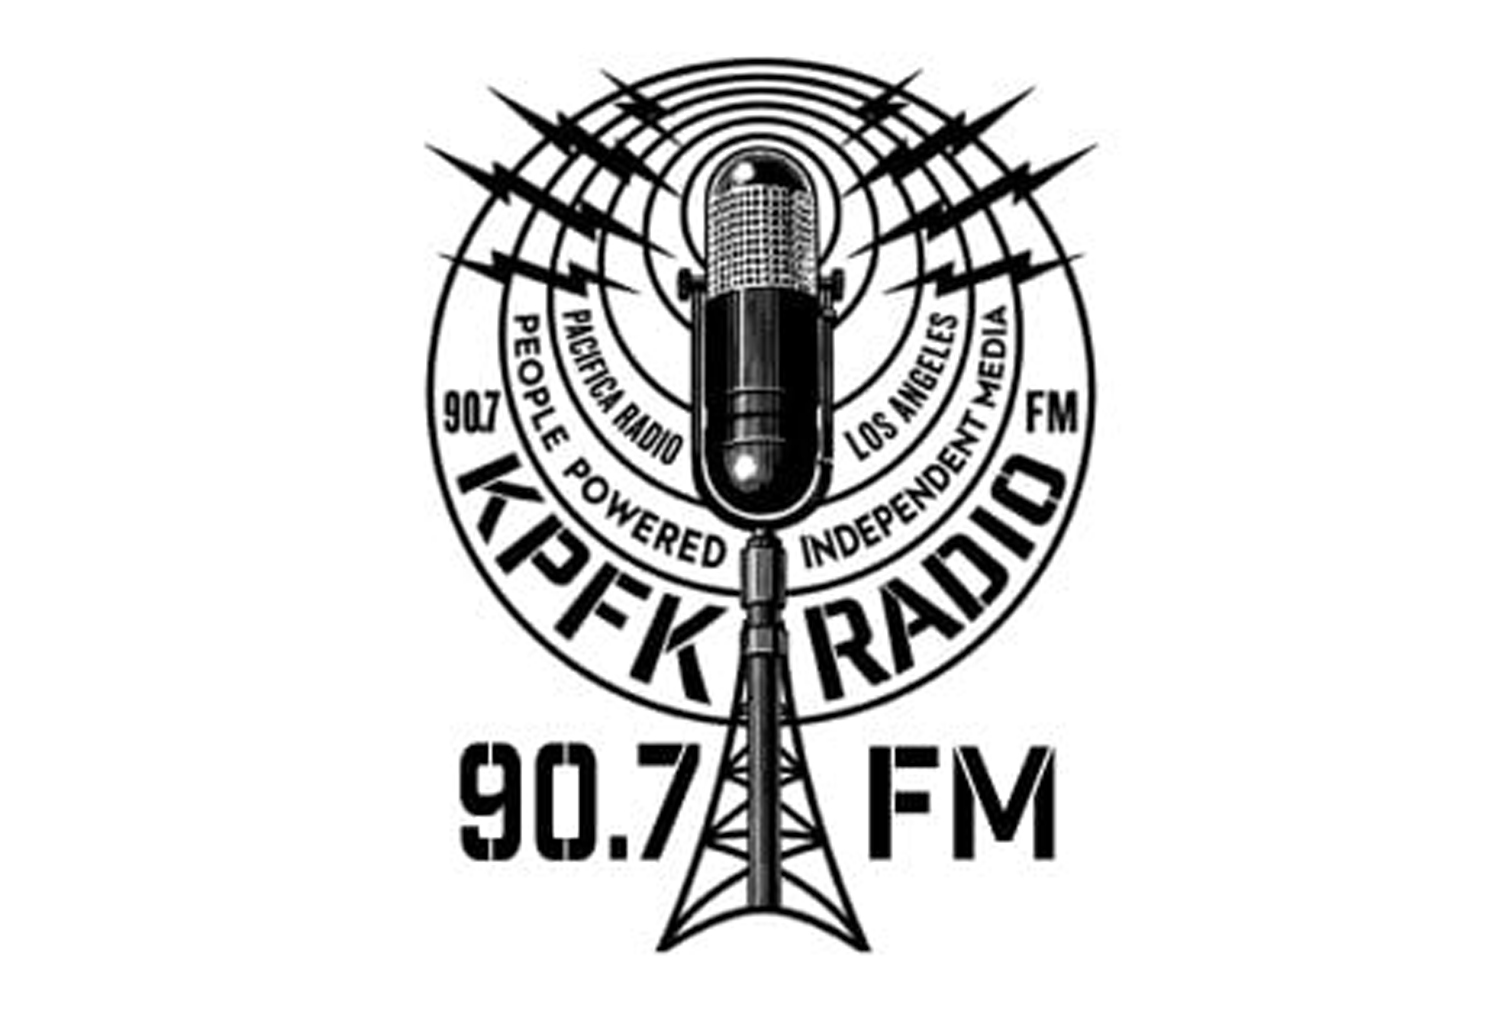 thumb - Was honored to be a studio guest on KPFK 90.7 FM Los Angeles